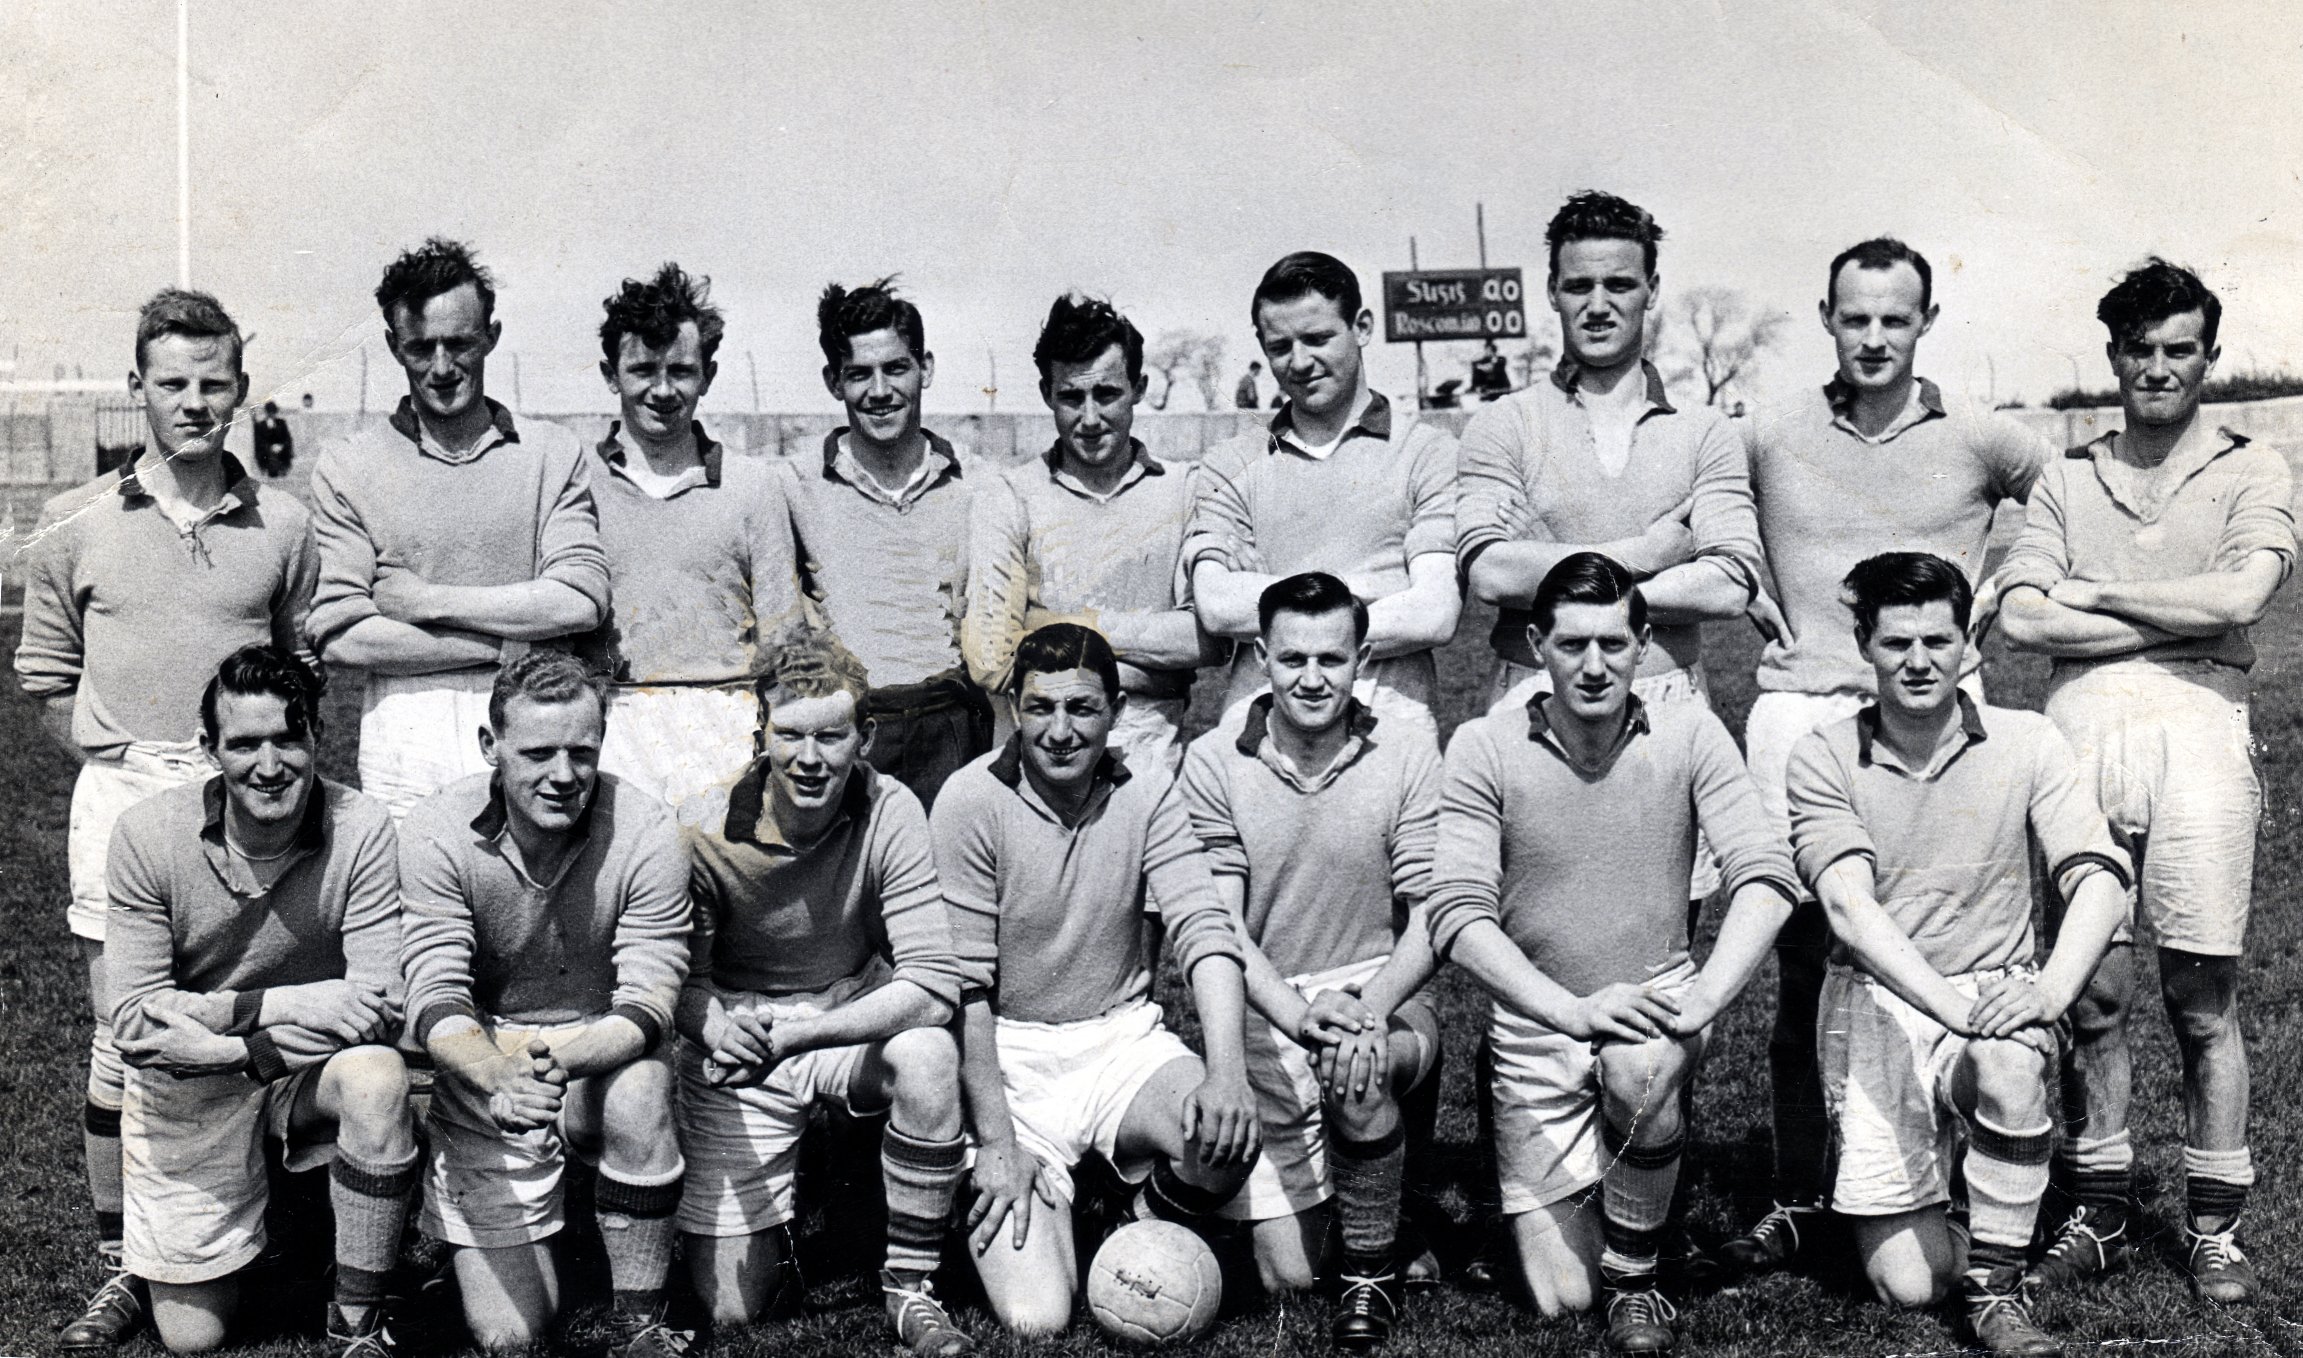 an old pograph of a soccer team that played in the 1960's